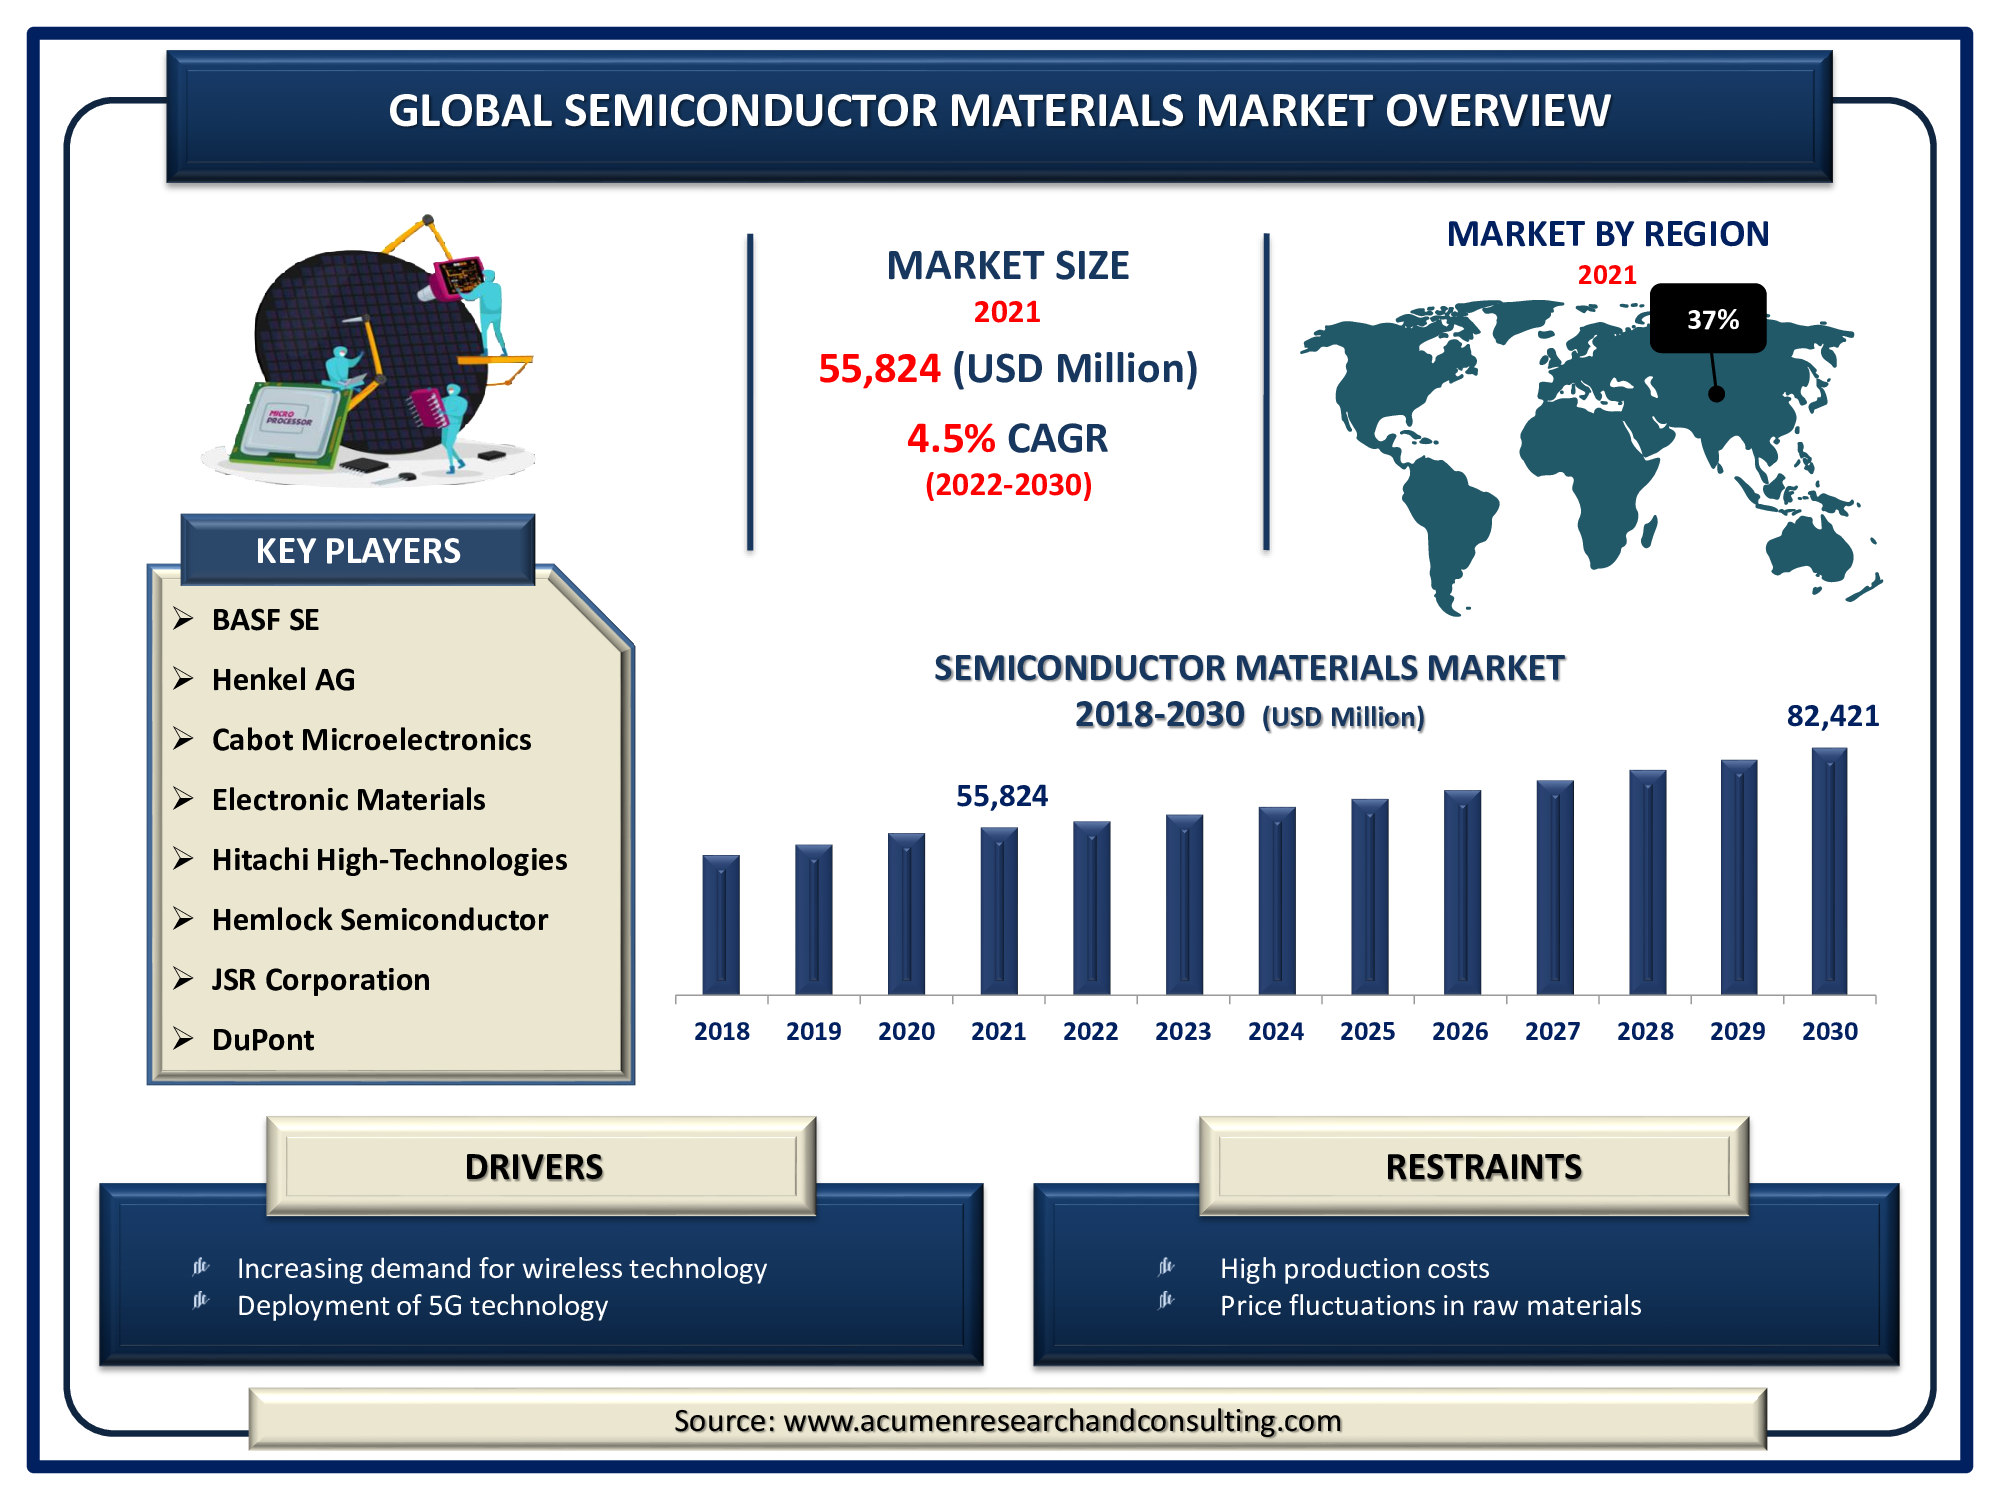 Semiconductor Materials Market is expected to reach USD 82,421 Million by 2030growing at a CAGR of 4.5%